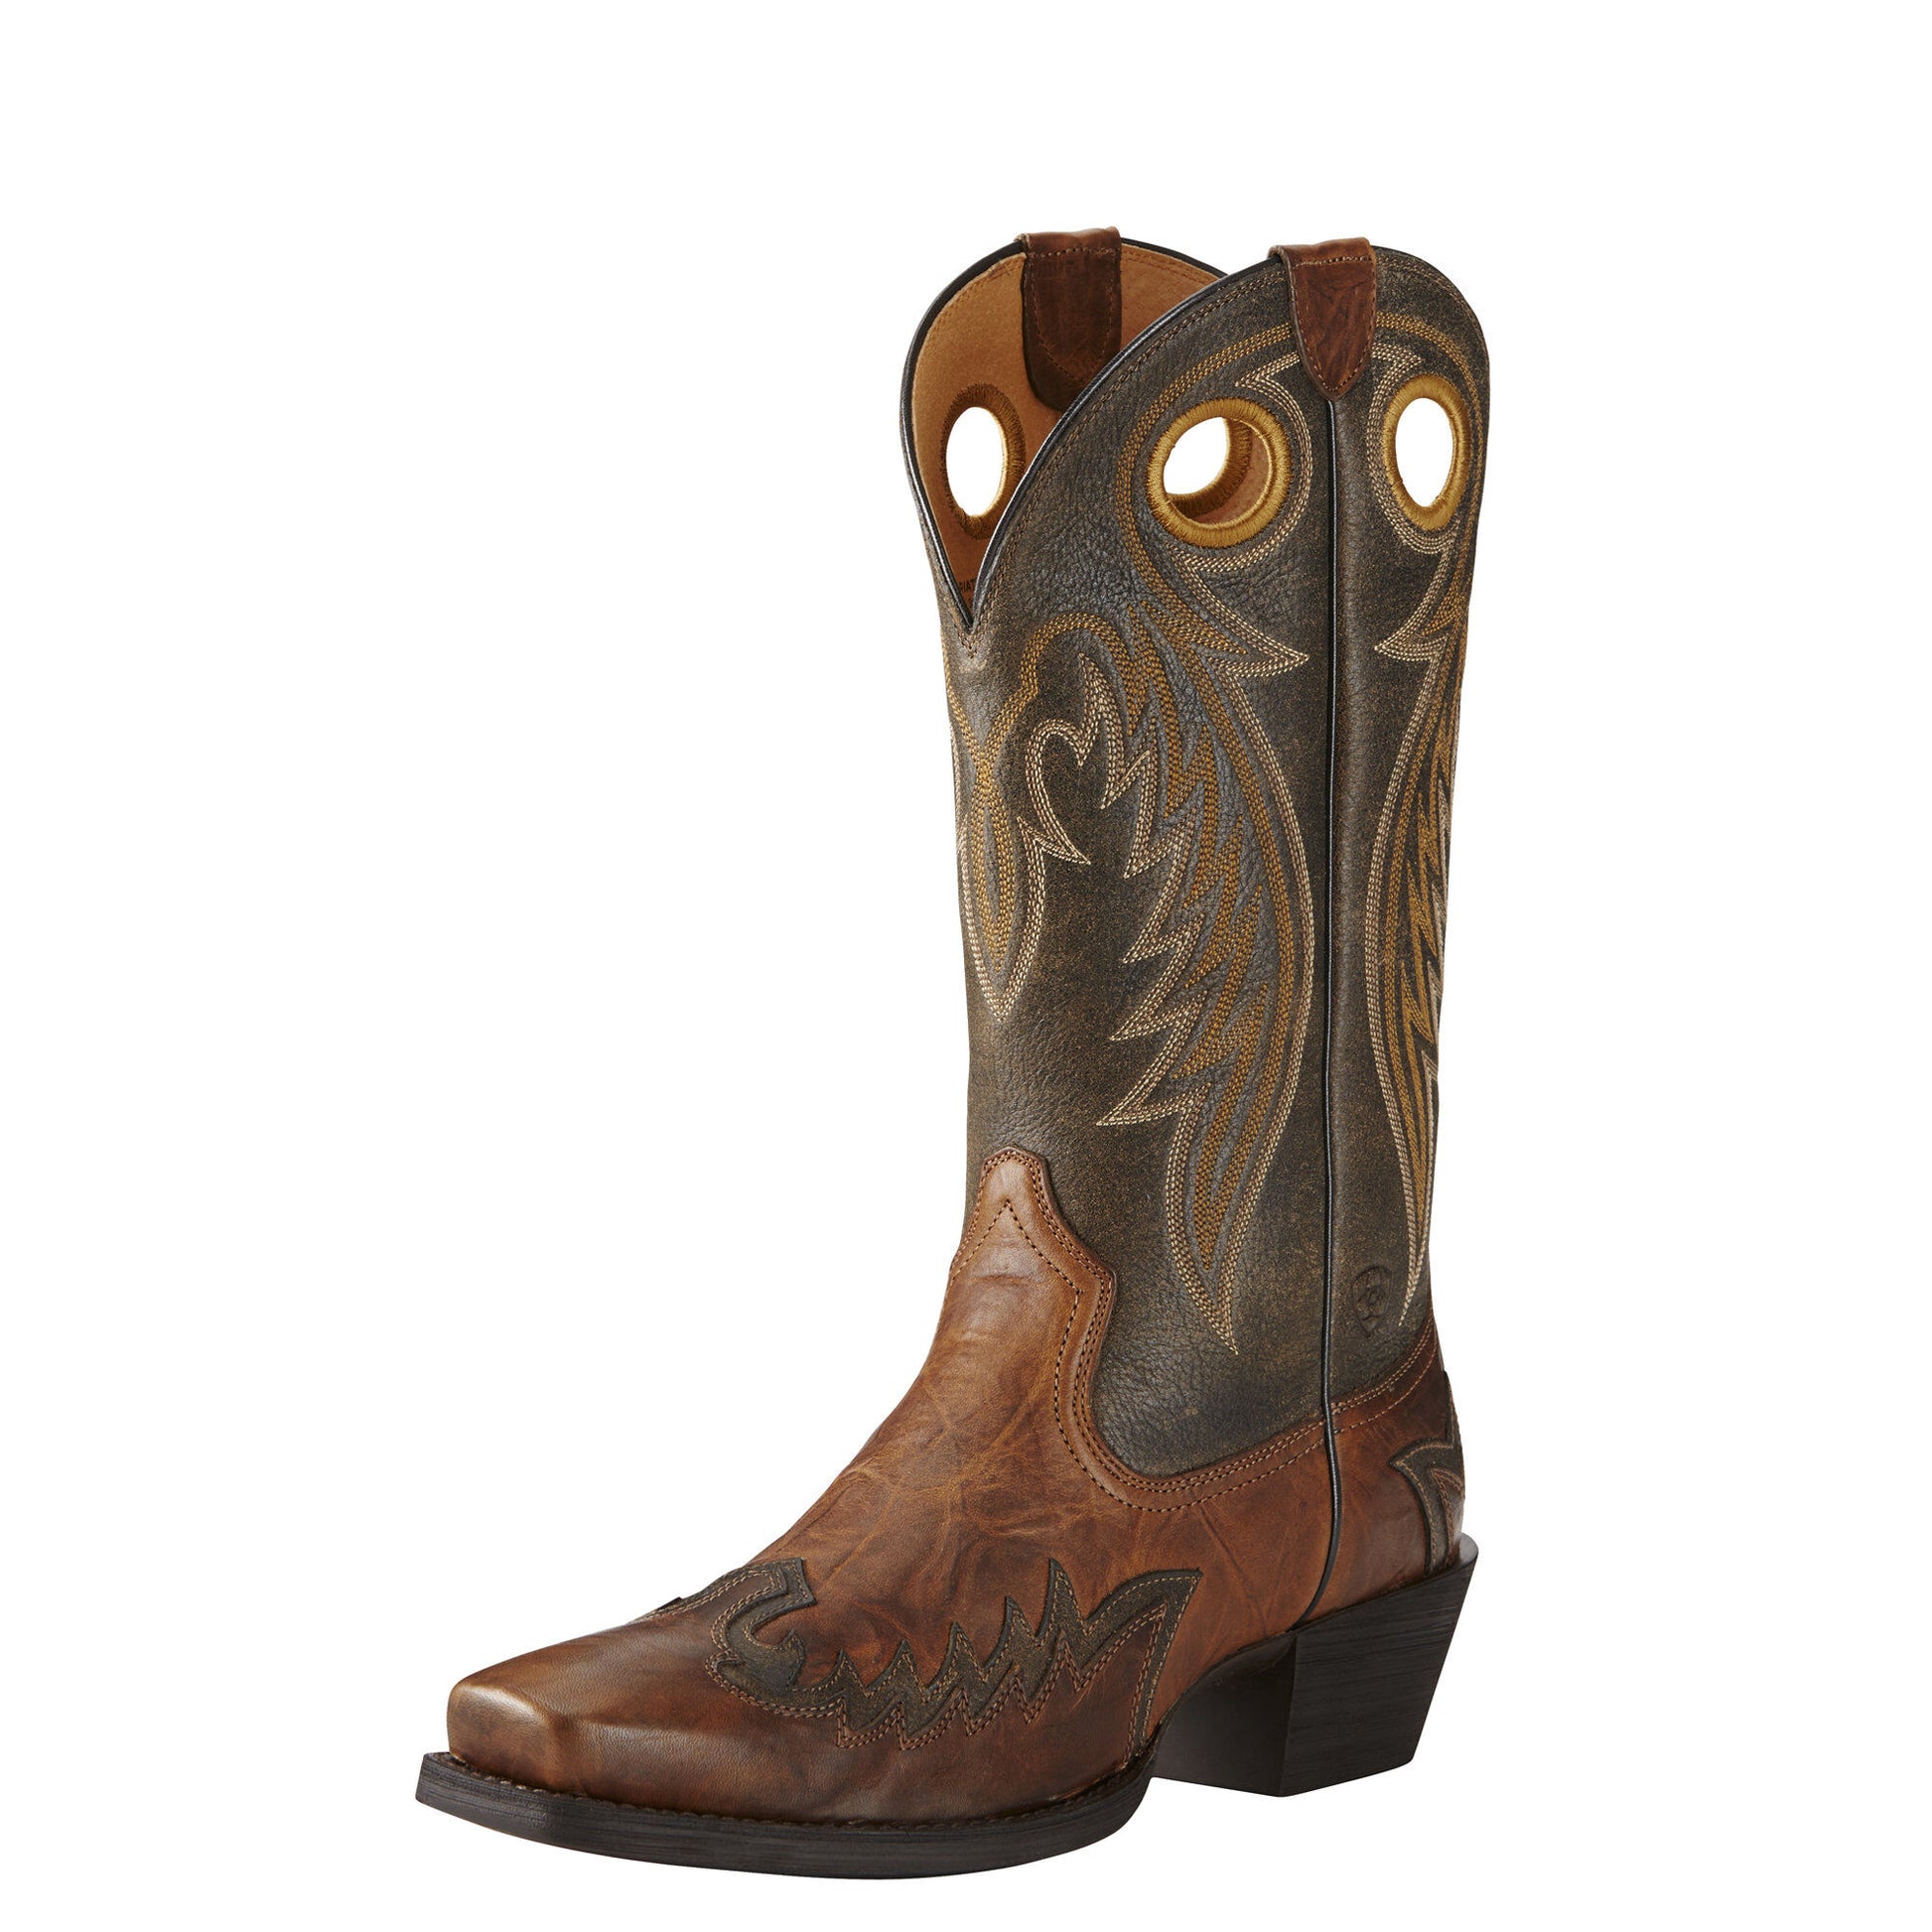 Ariat Men's Rival Boot - Barn Brown/Brooklyn Brown - French's Boots